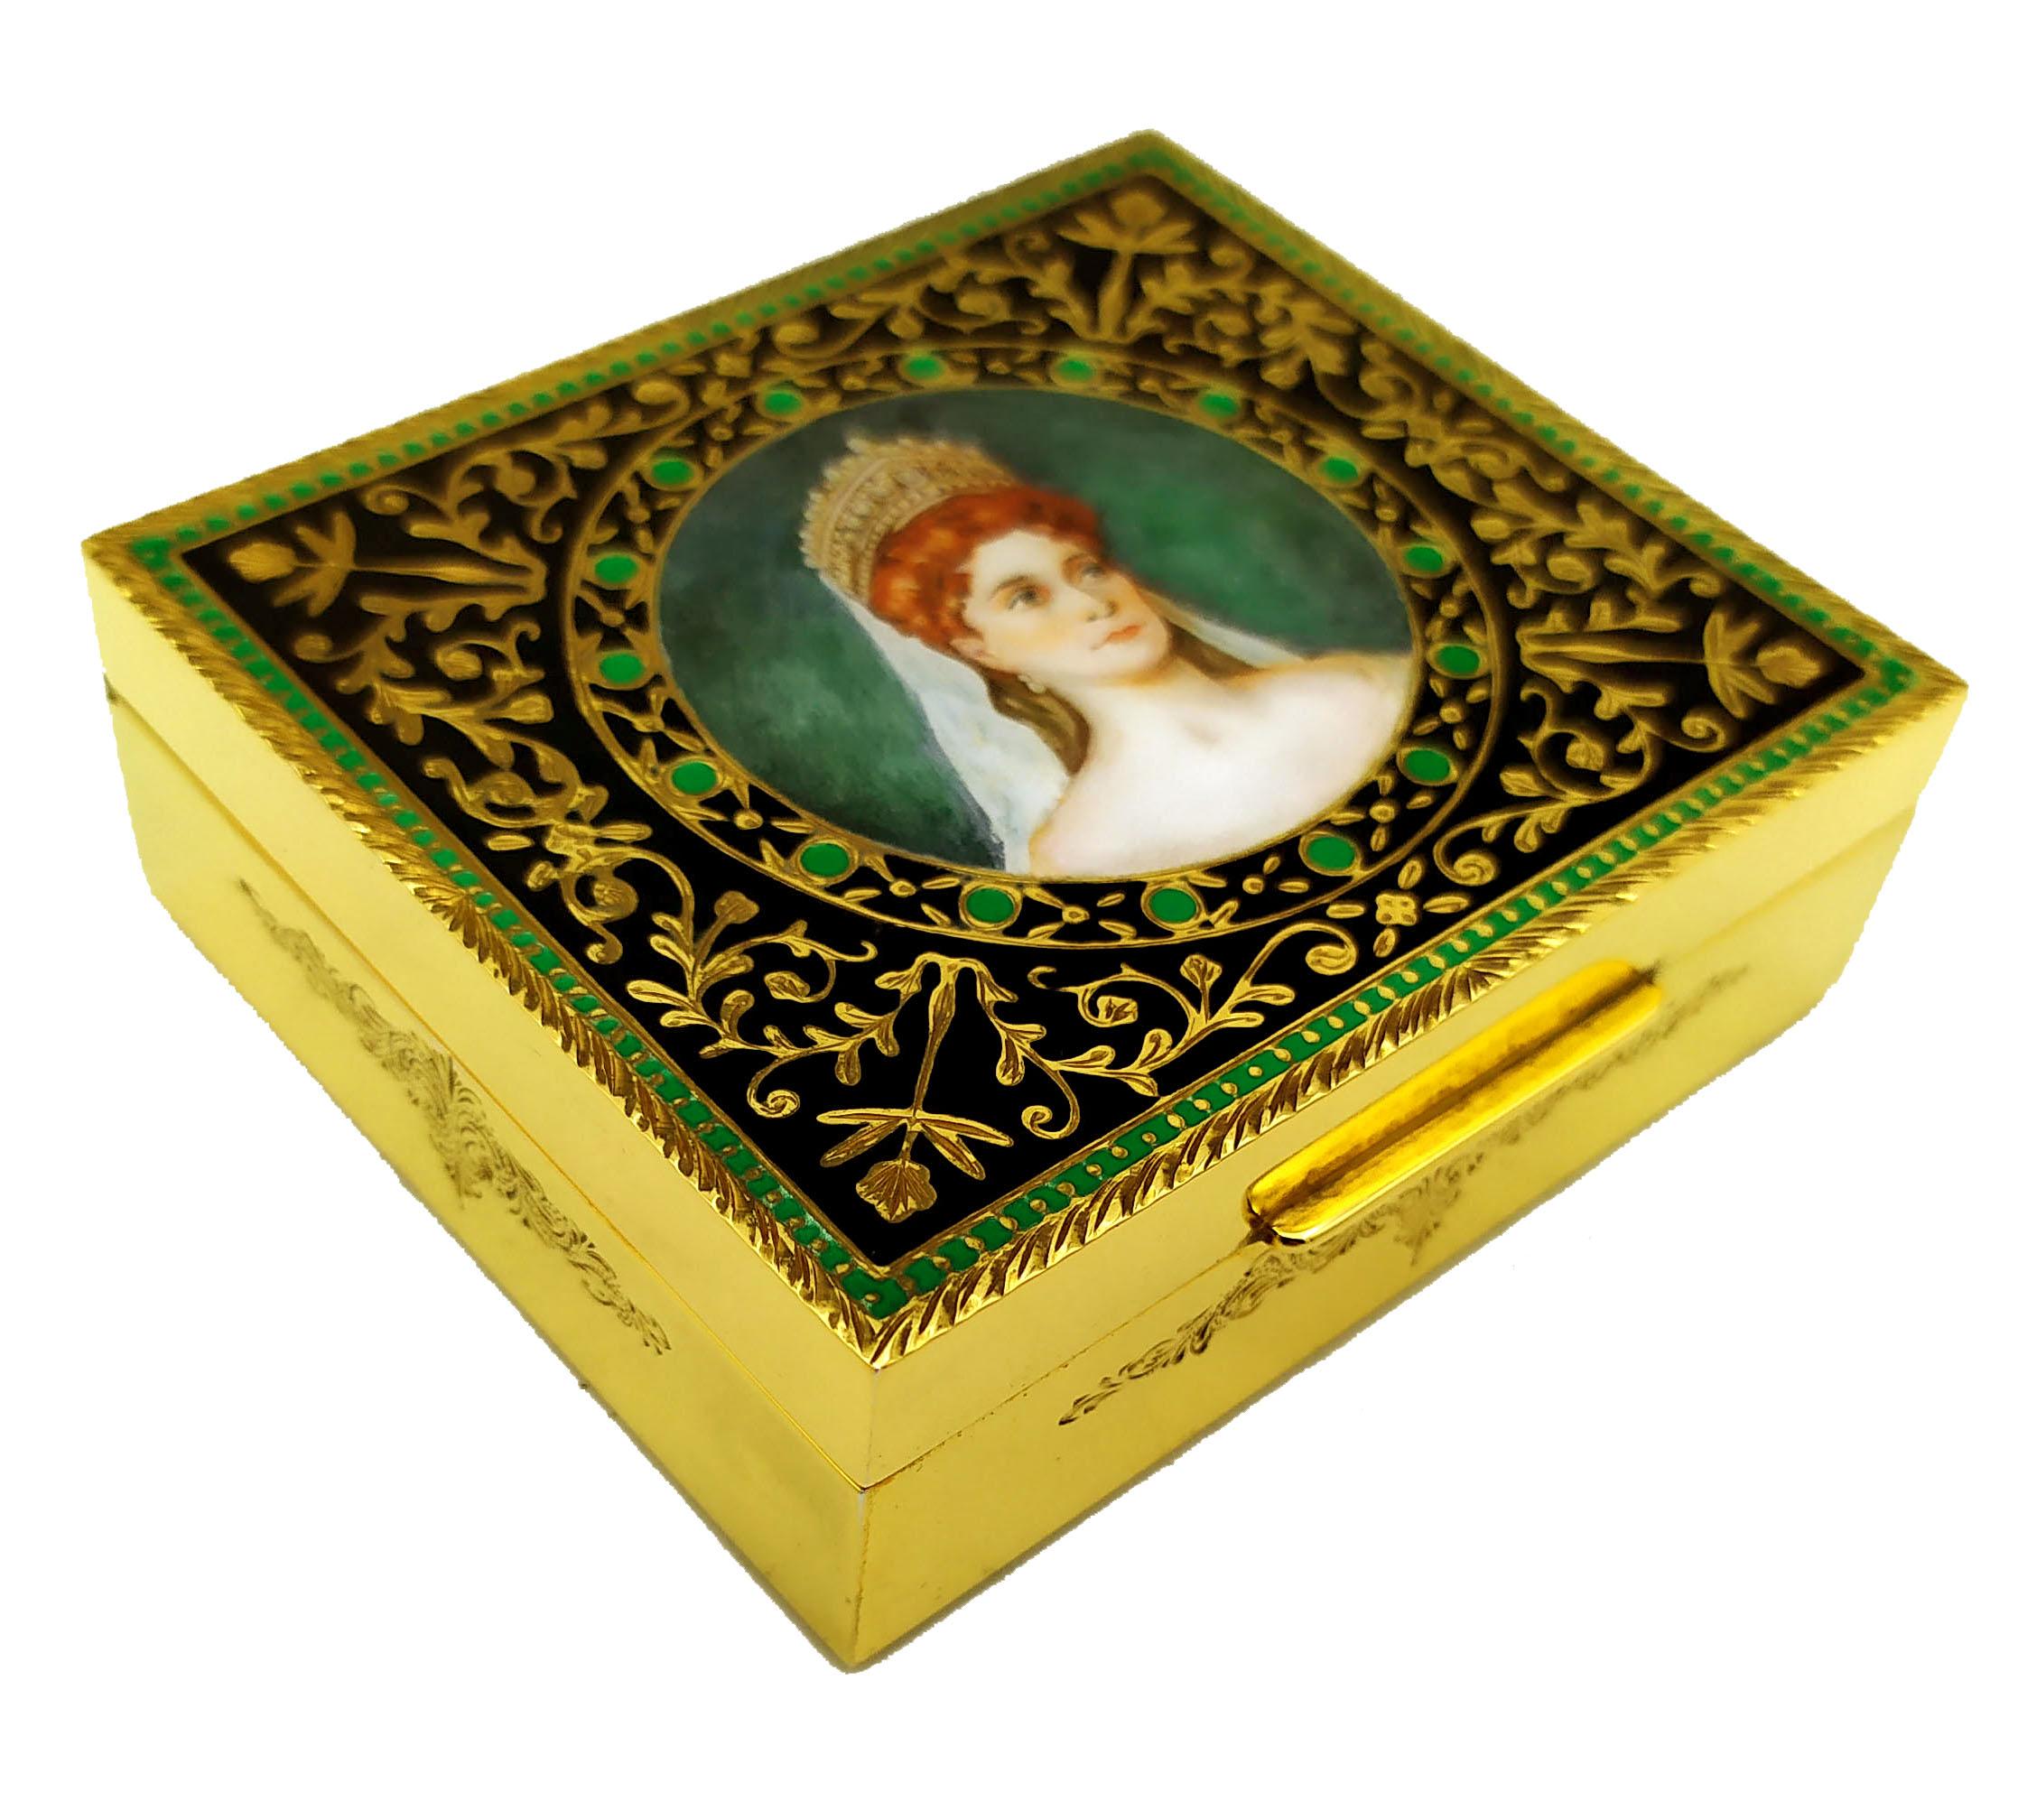 Snuff Box Silver is in 925/1000 sterling.
Snuff Box Silver has fired enamelled handmade portrait of Tsarina Alexandra Fedorovna Romanova by the painter Beatrice Mellana.
Snuff Box Silver has engraved and fire-enamelled ornaments by hand.
Snuff Box